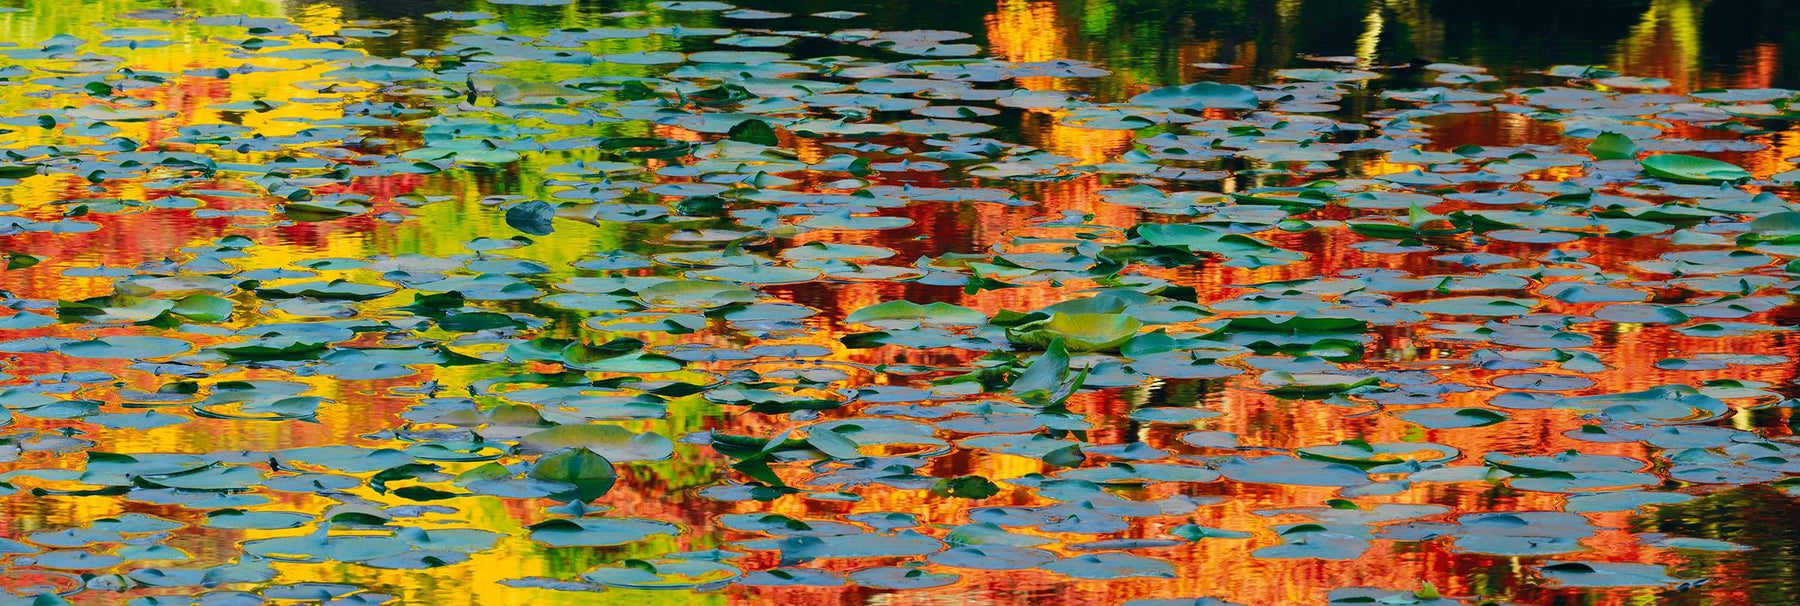 Pond full of lily pads with Autumn colors reflecting on the water